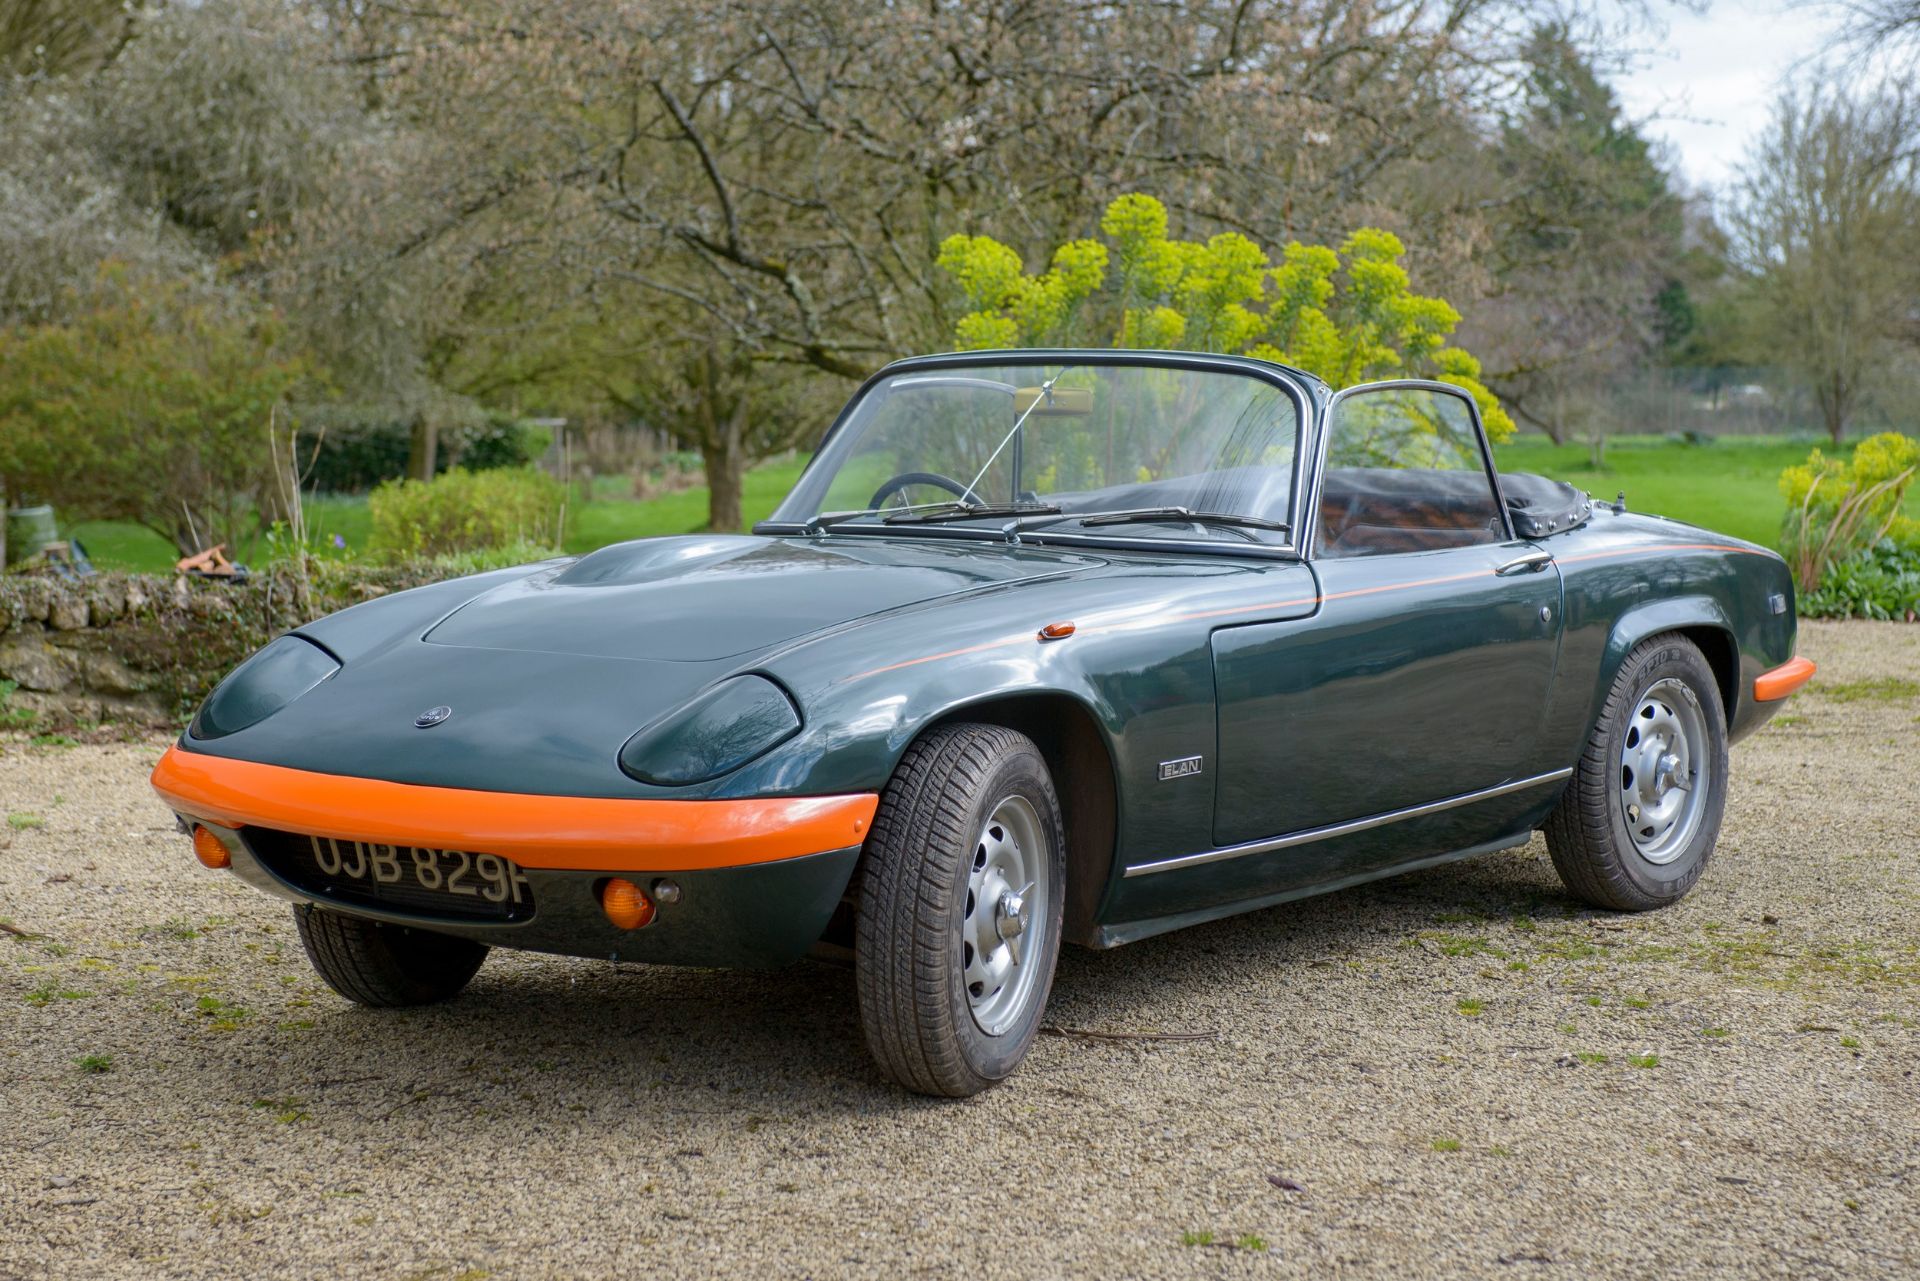 1969 LOTUS ELAN SERIES 4 BRM DROPHEAD COUPE Chassis Number: 45/9498 Registration Number: UJB 829H